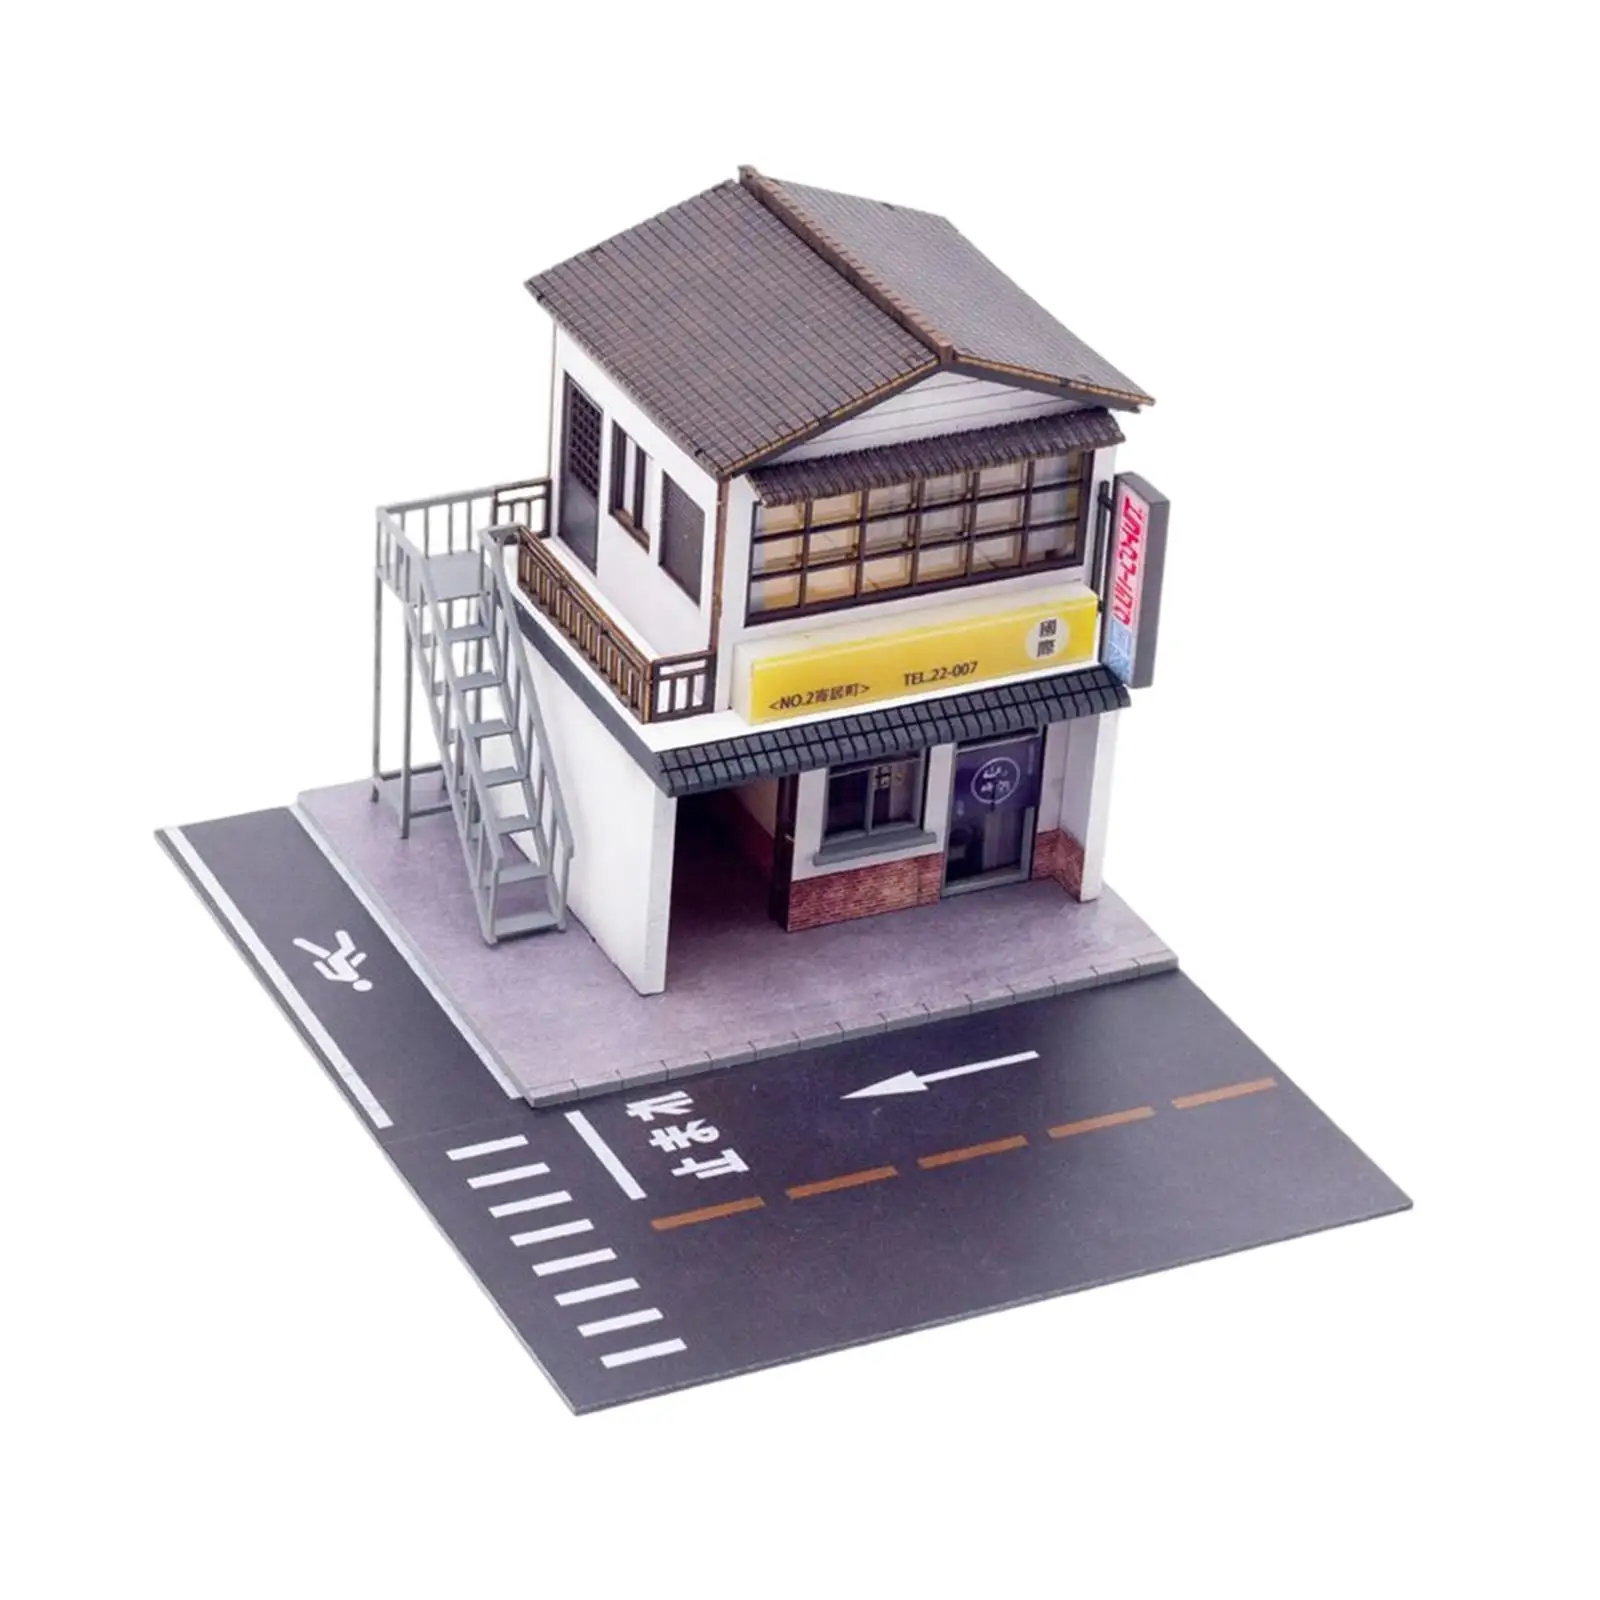 Miniature 1/64 Dry Cleaners Diorama Scene Toy Collection Gifts Sand Table Layout City DIY Model Home Office Desktop Ornament